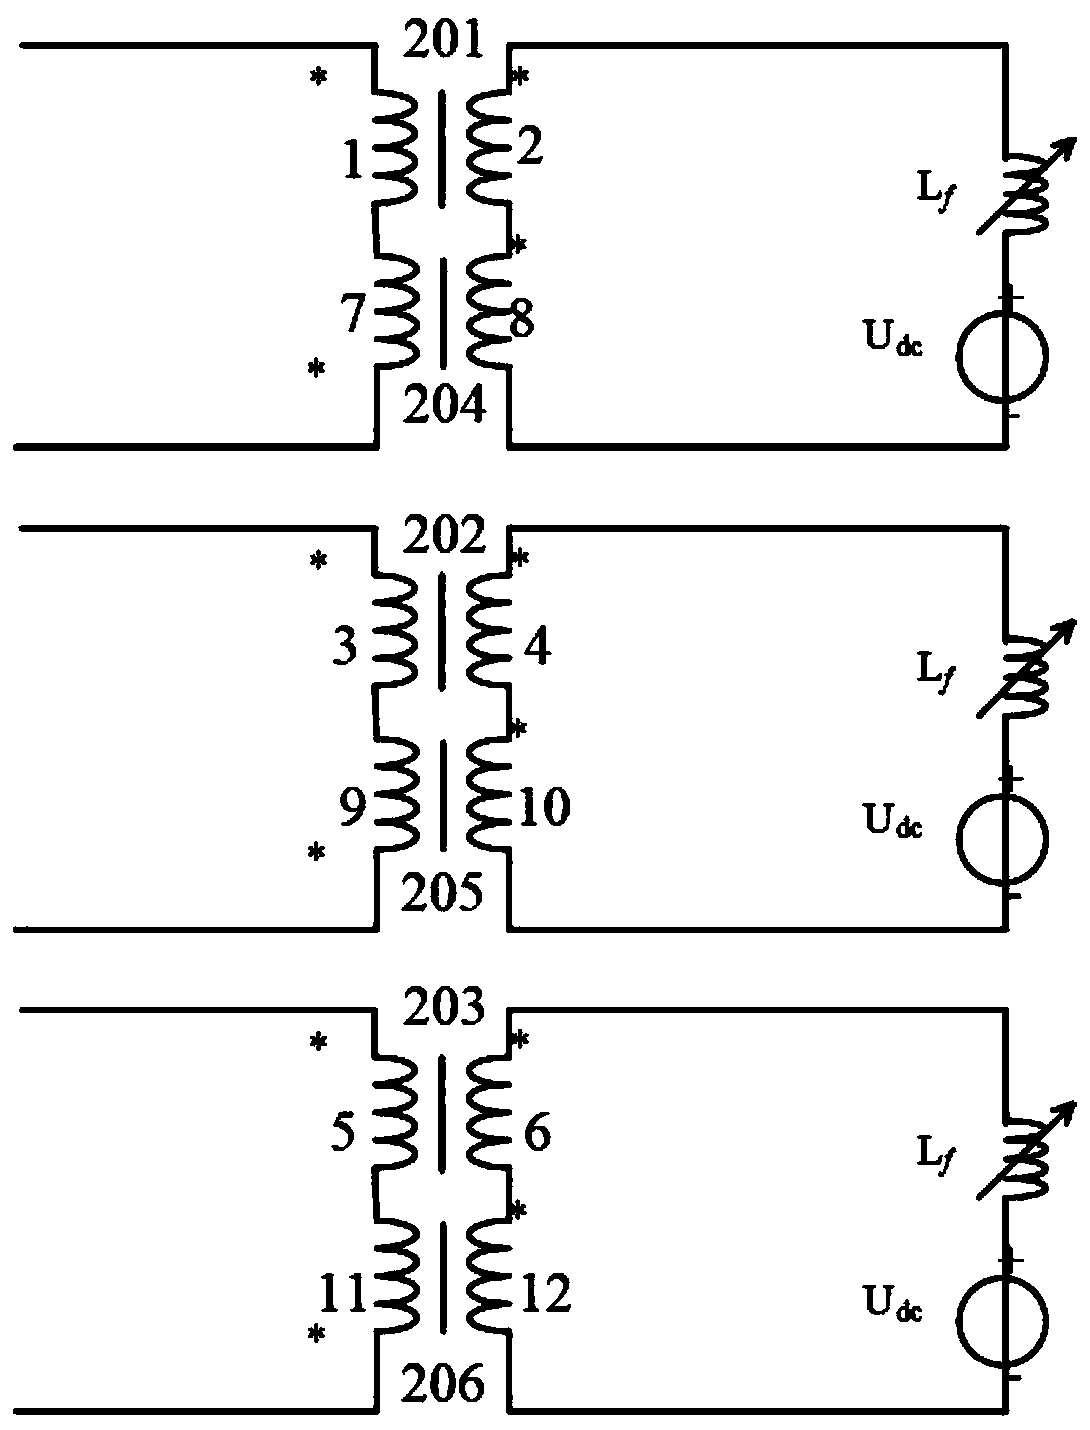 Mixed excitation type economical three-phase magnetic saturation fault current limiter